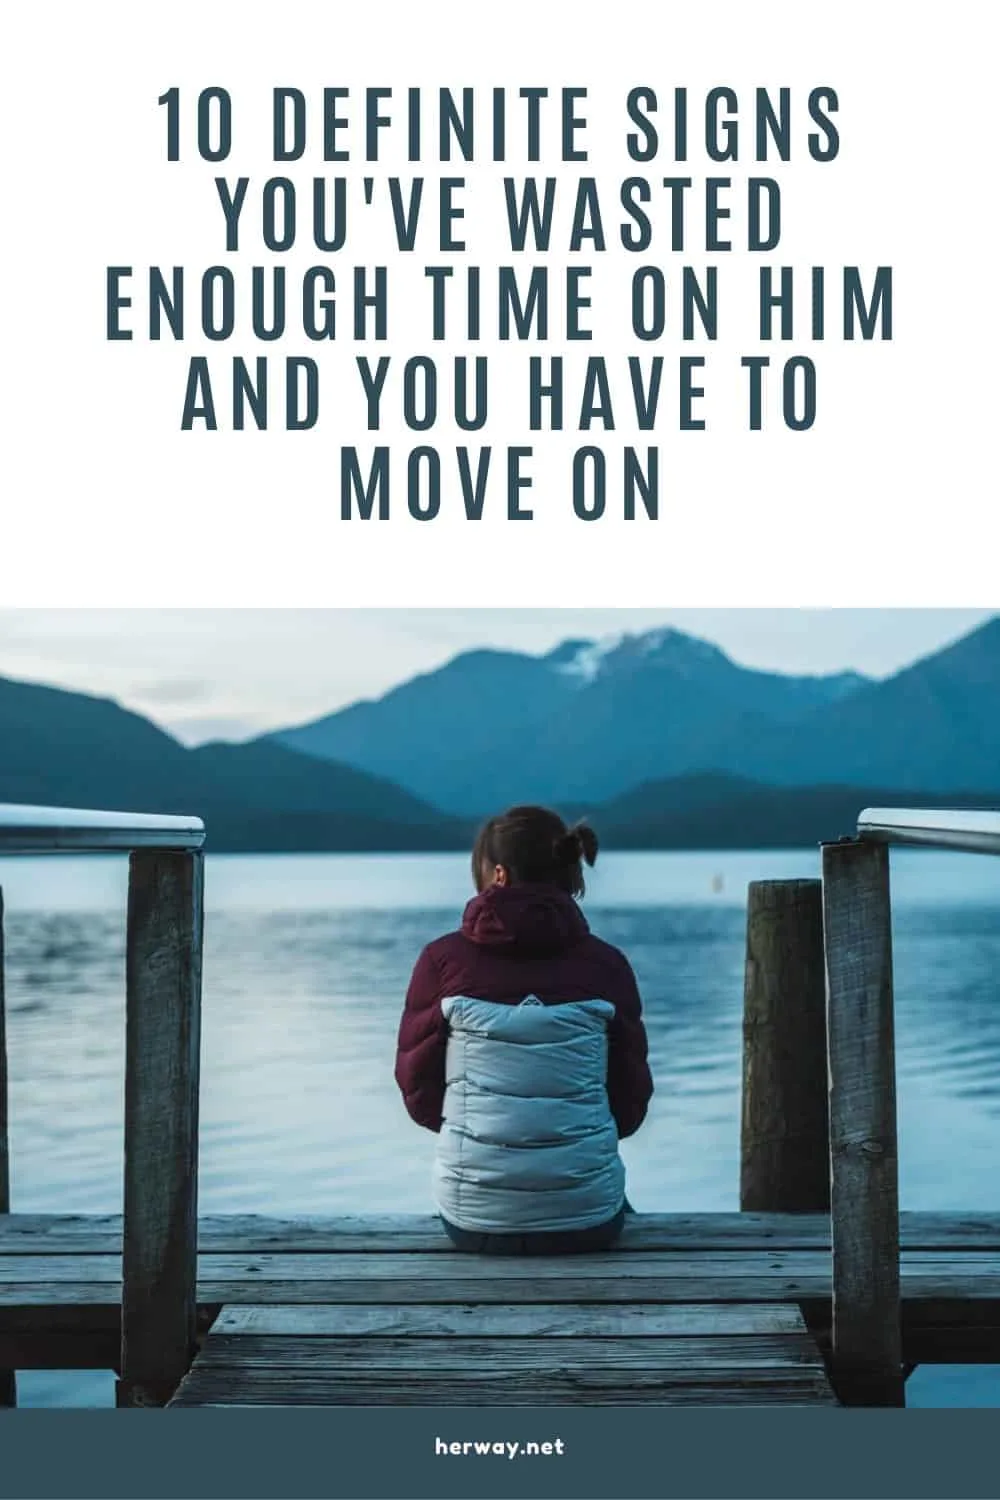 10 Definite Signs You've Wasted Enough Time On Him And You Have To Move On